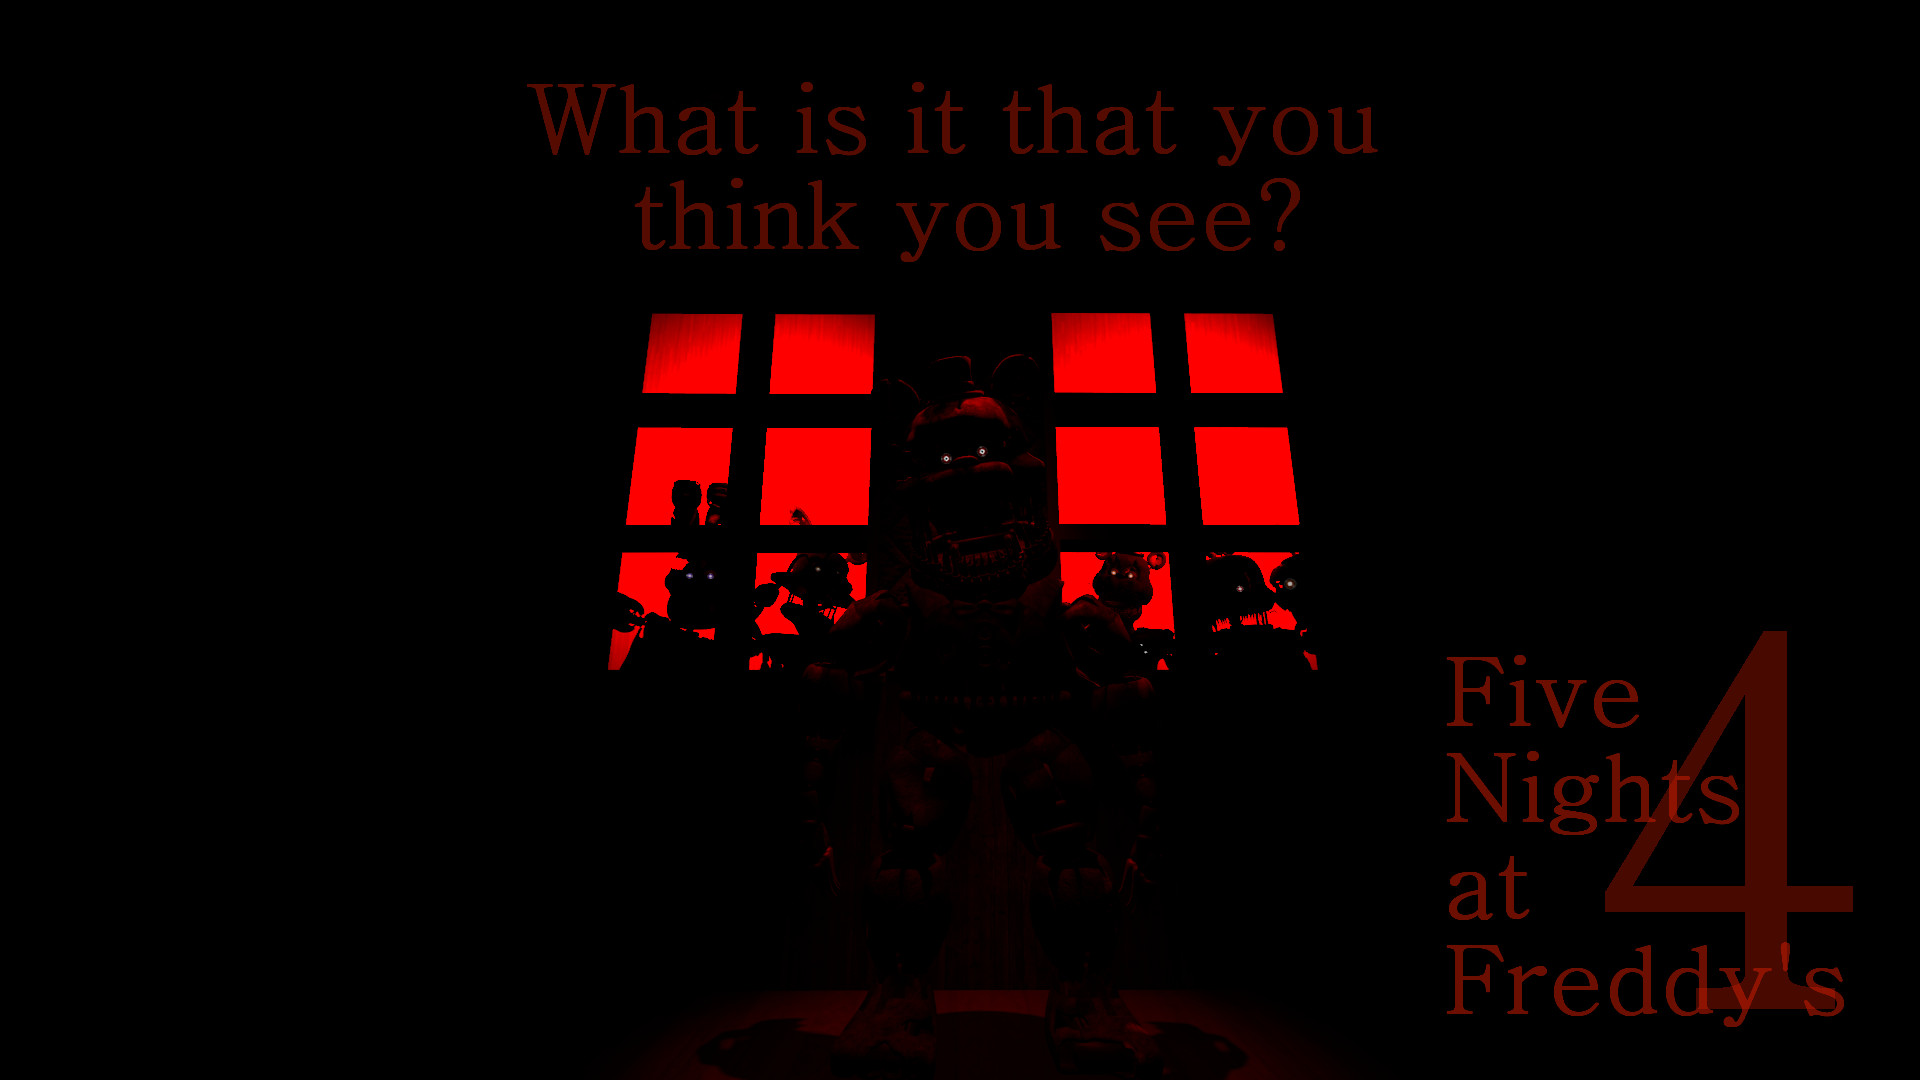 ImageI edited my FNaF 4 Desktop BG slightly, making the text myself to improve the quality. What do you think now